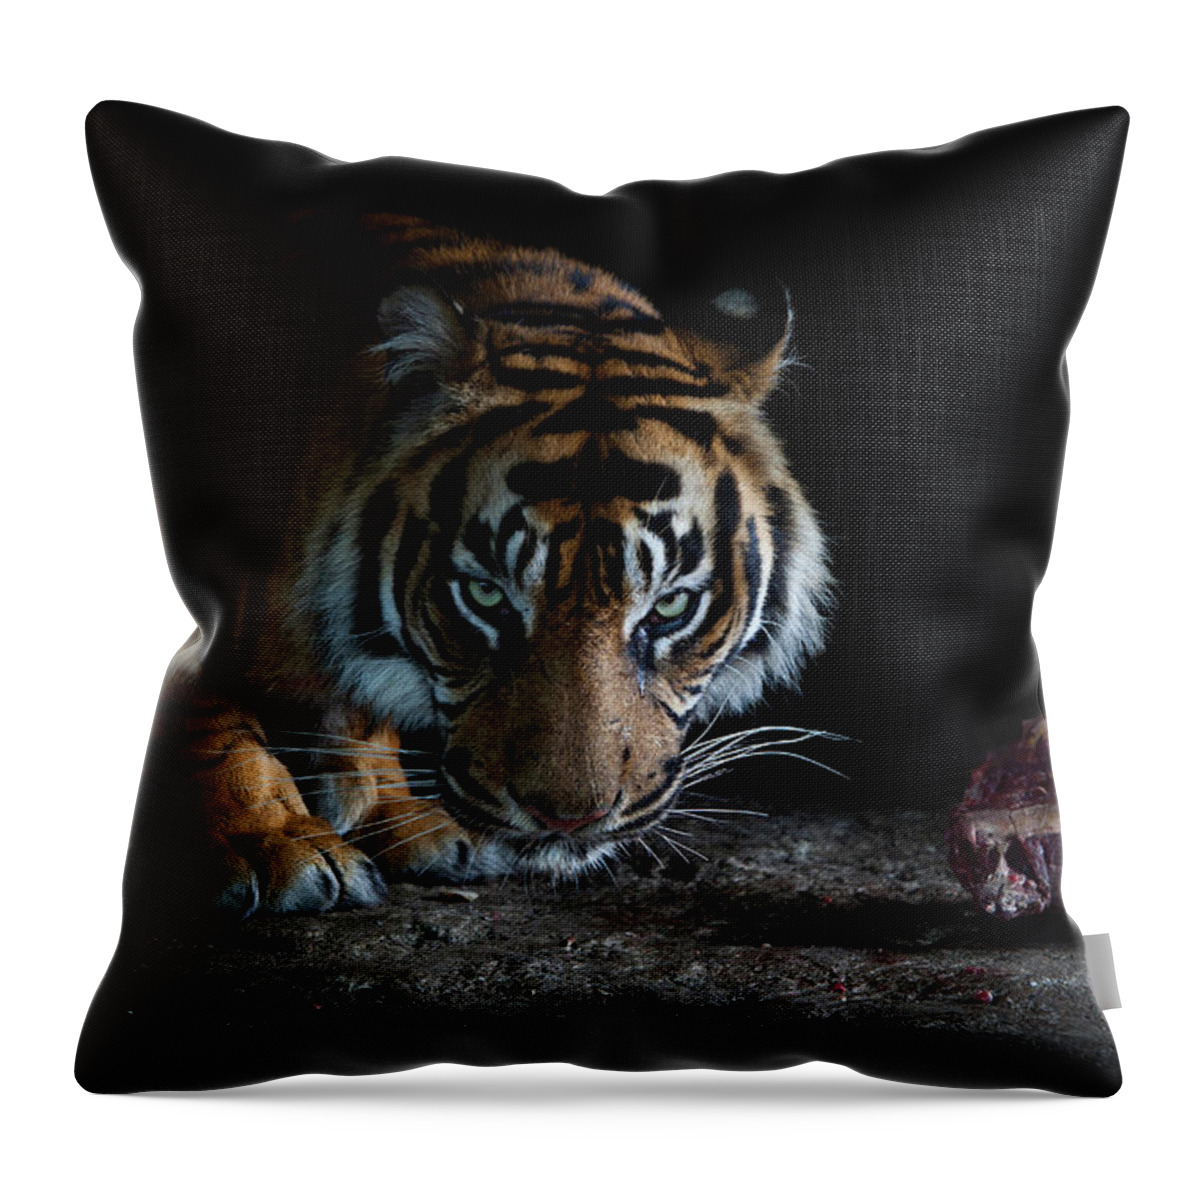 Animal Themes Throw Pillow featuring the photograph Tiger Dinner by By Valentijn Tempels